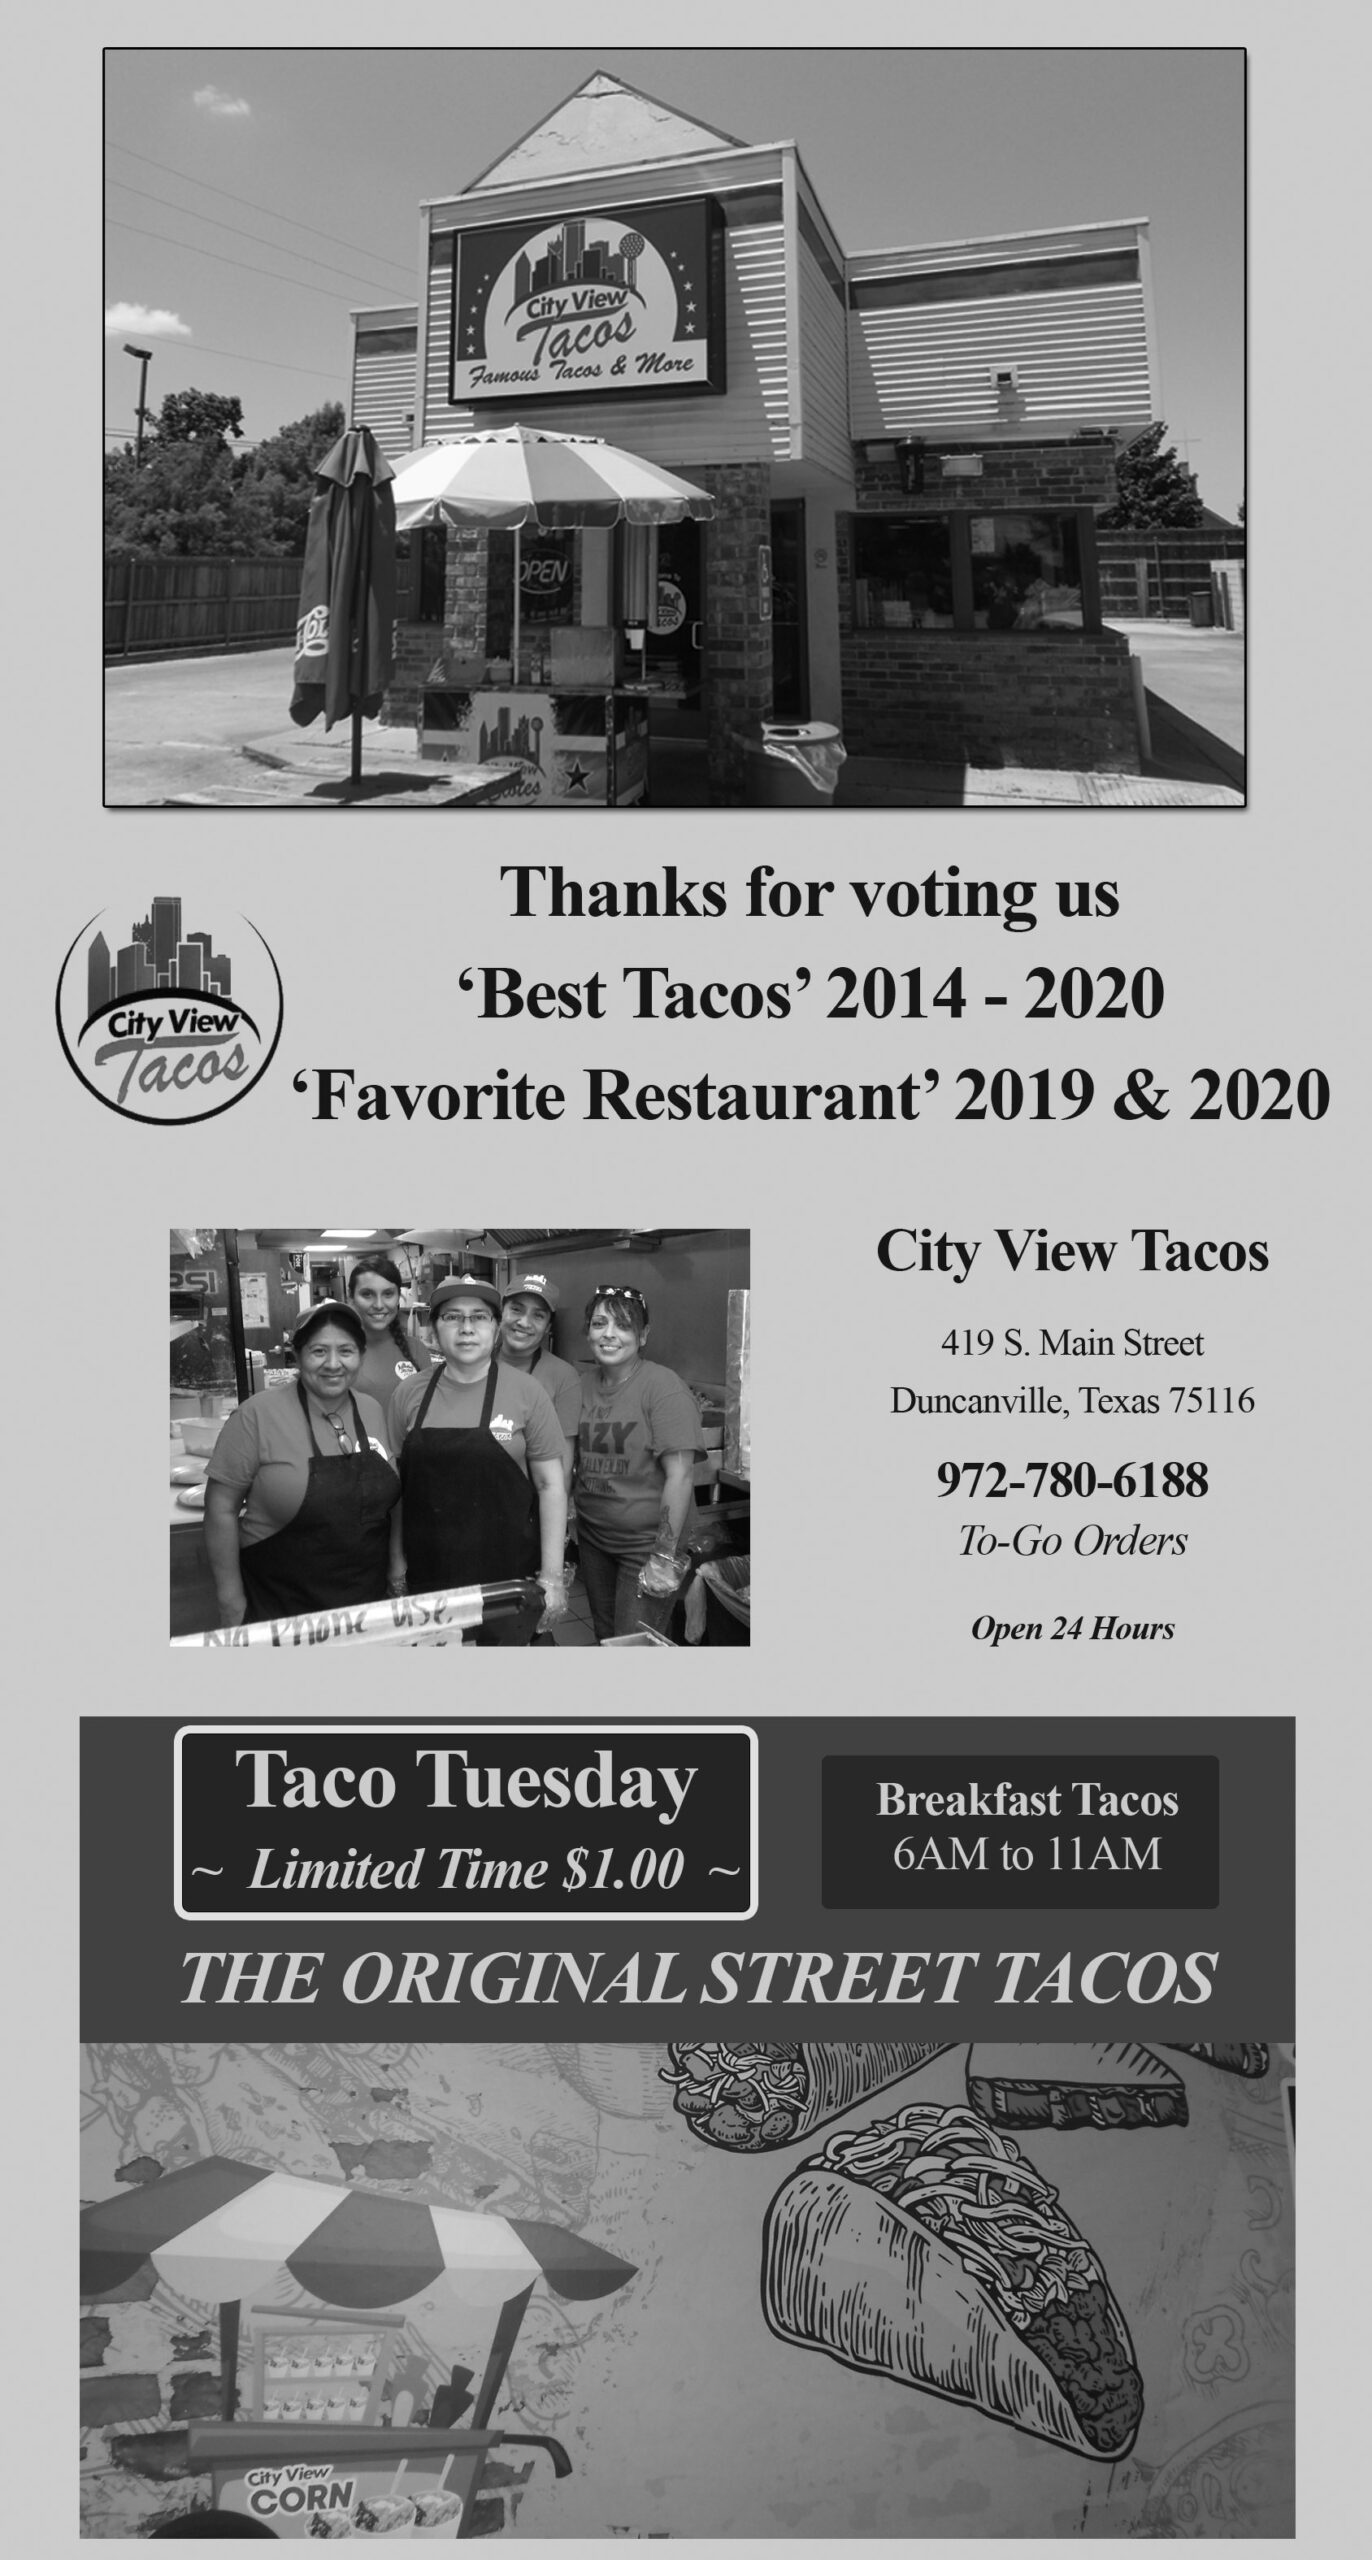 City View Tacos Takes Honors Again Focus Daily News